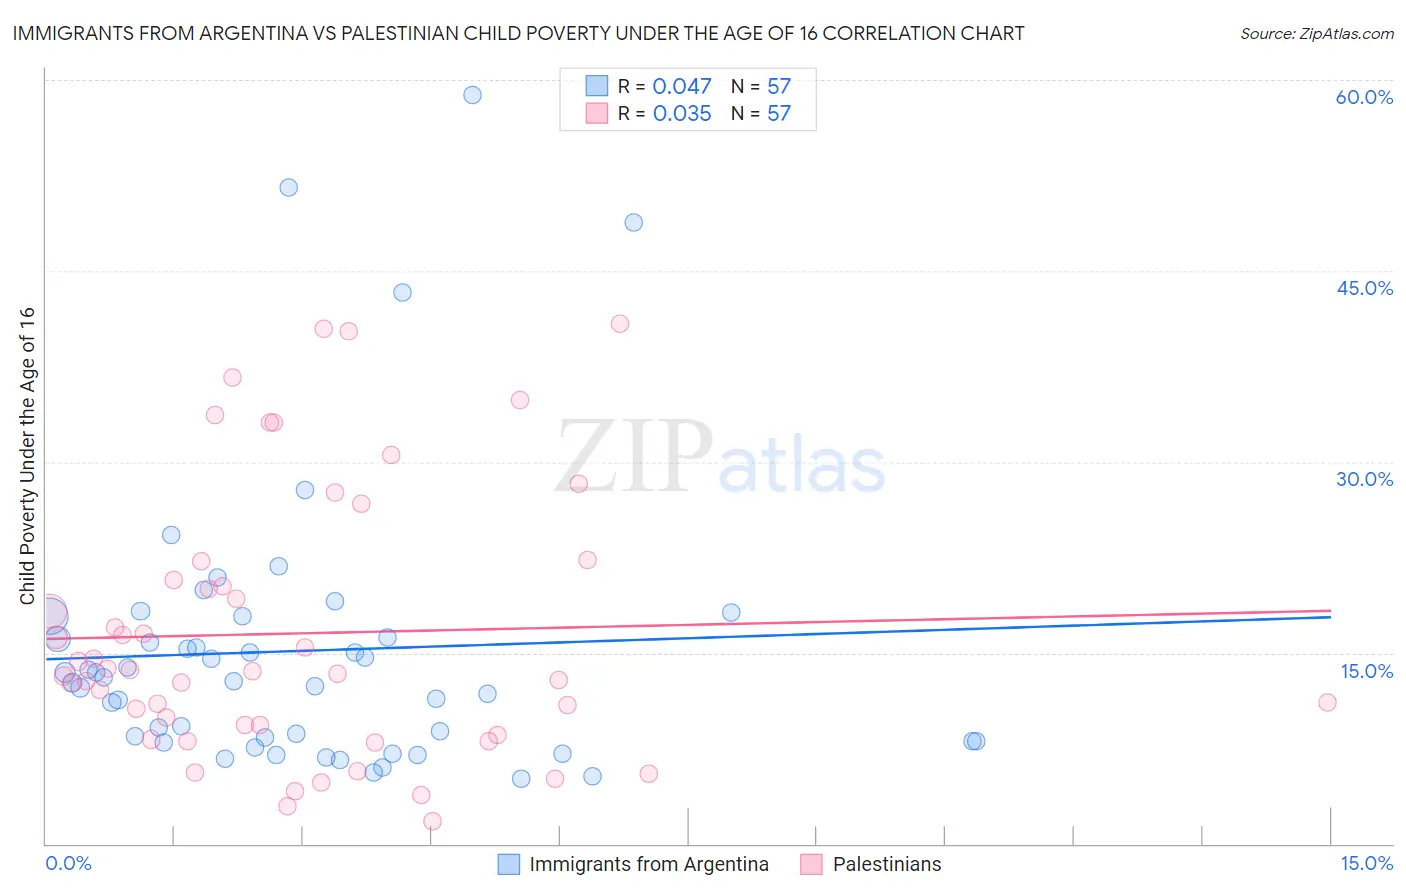 Immigrants from Argentina vs Palestinian Child Poverty Under the Age of 16